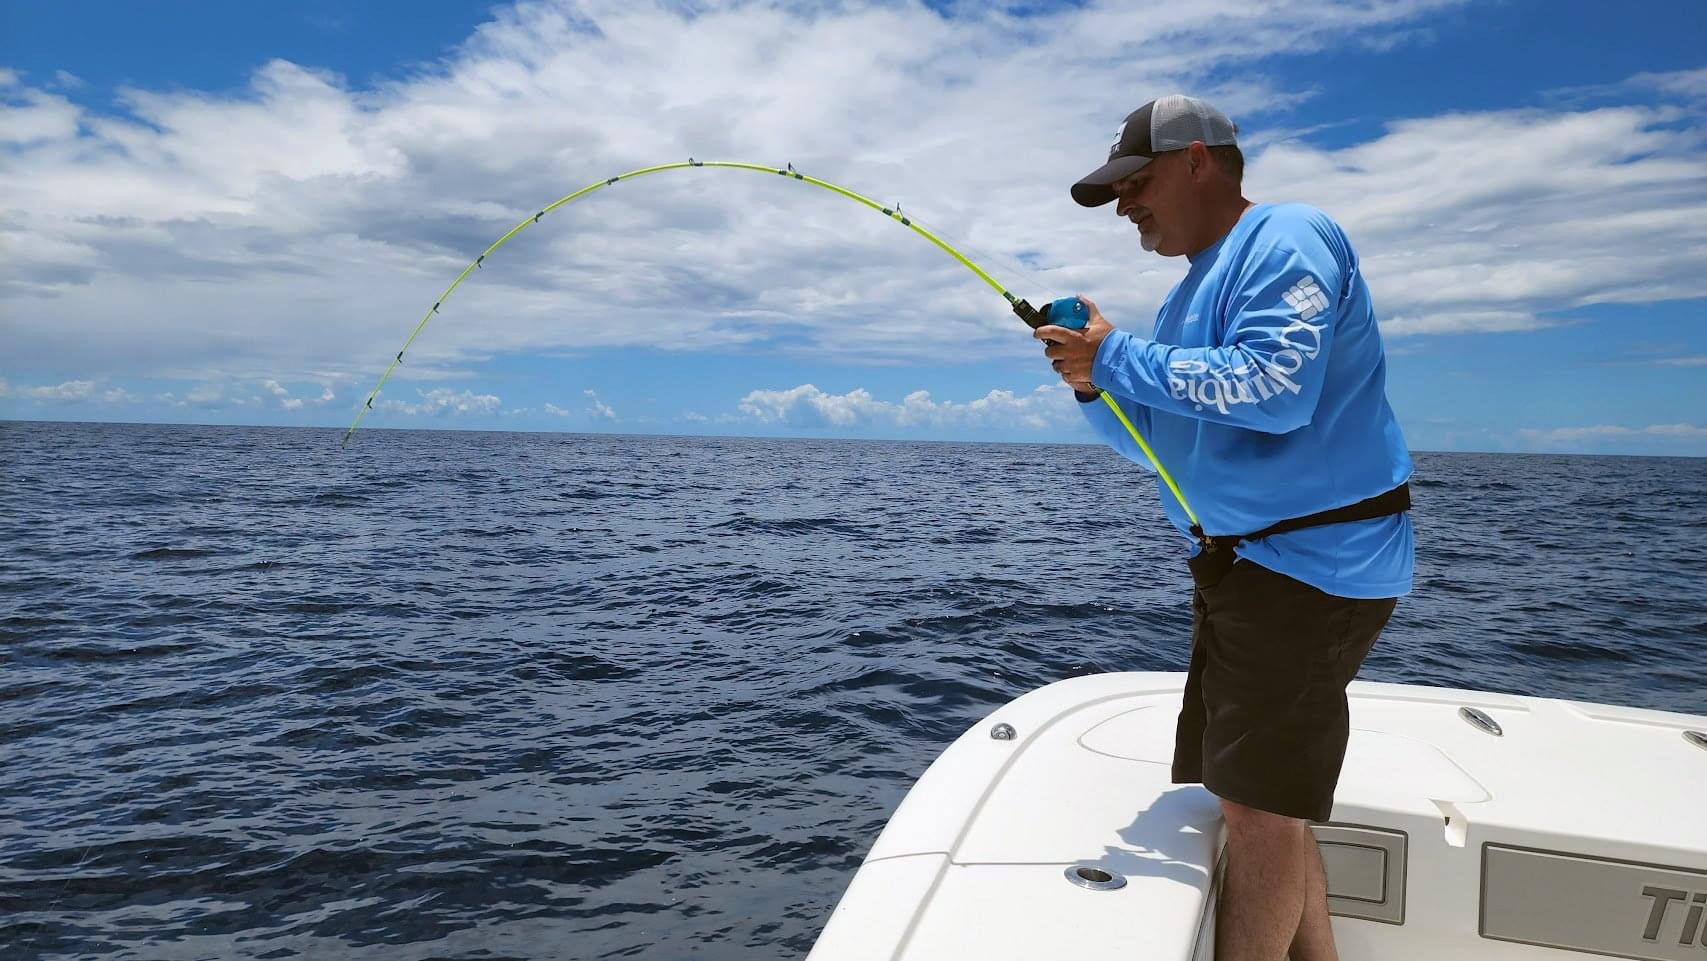 Need rod advice for sharks from the surf - The Hull Truth - Boating and  Fishing Forum